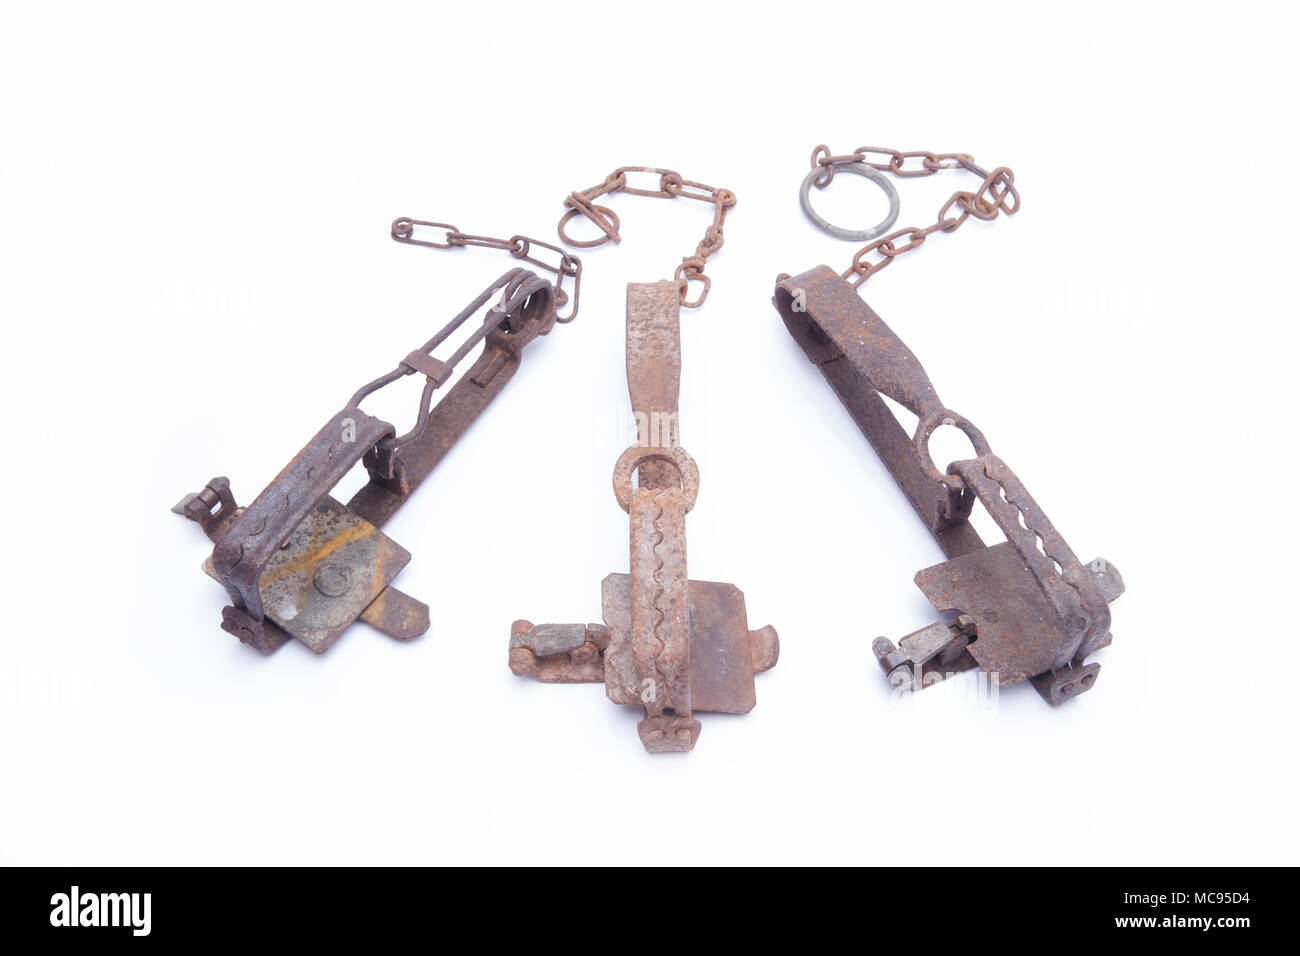 Old gin traps in the fired position that were used for catching mammals in the UK. They are now illegal to use but can be collected and displayed as c Stock Photo